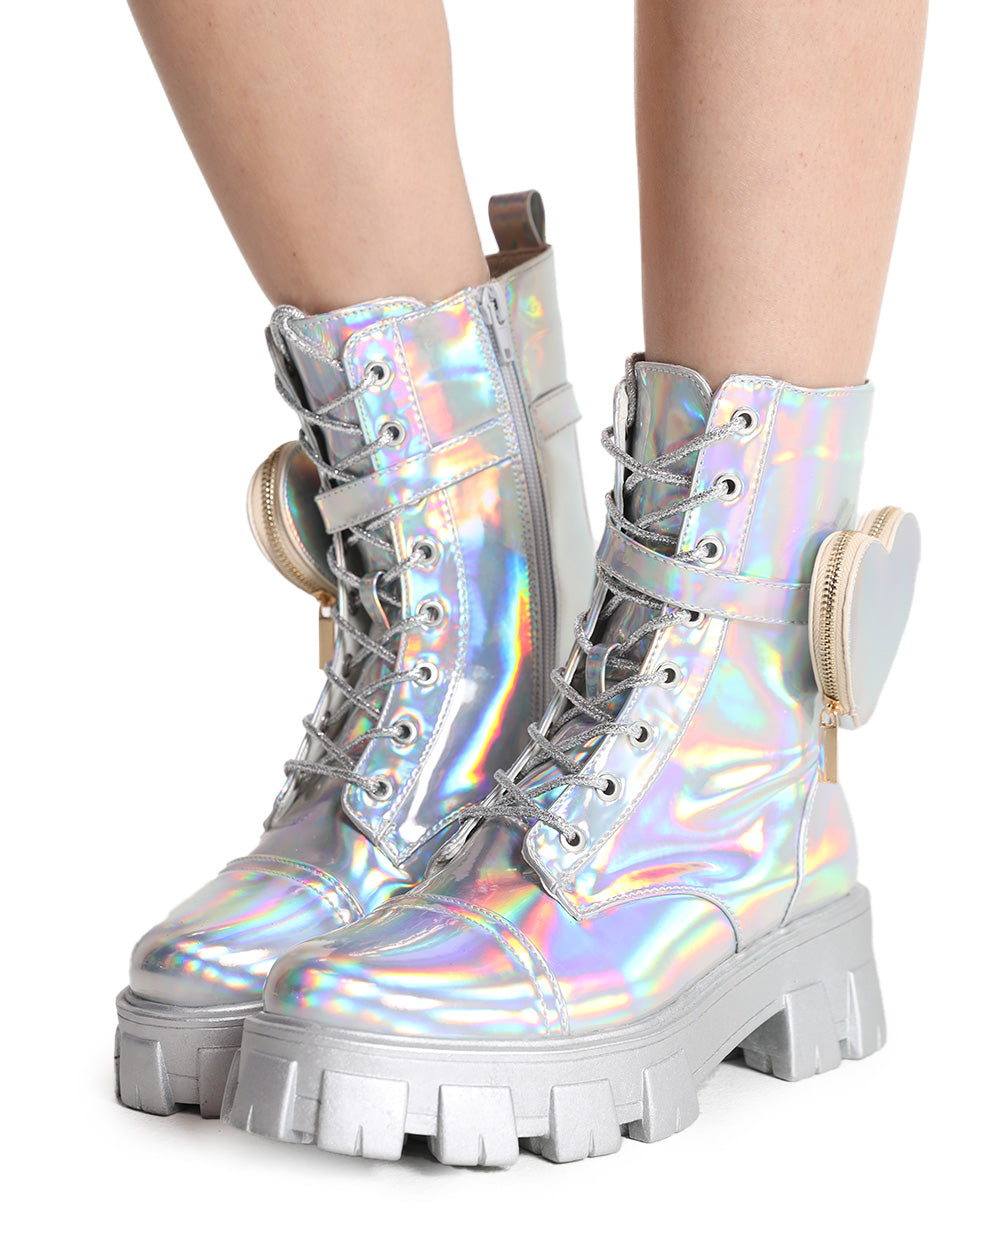 iHeartRaves Lovestruck Holo Combat Boots with Pocket-Rainbow/Silver-Side1